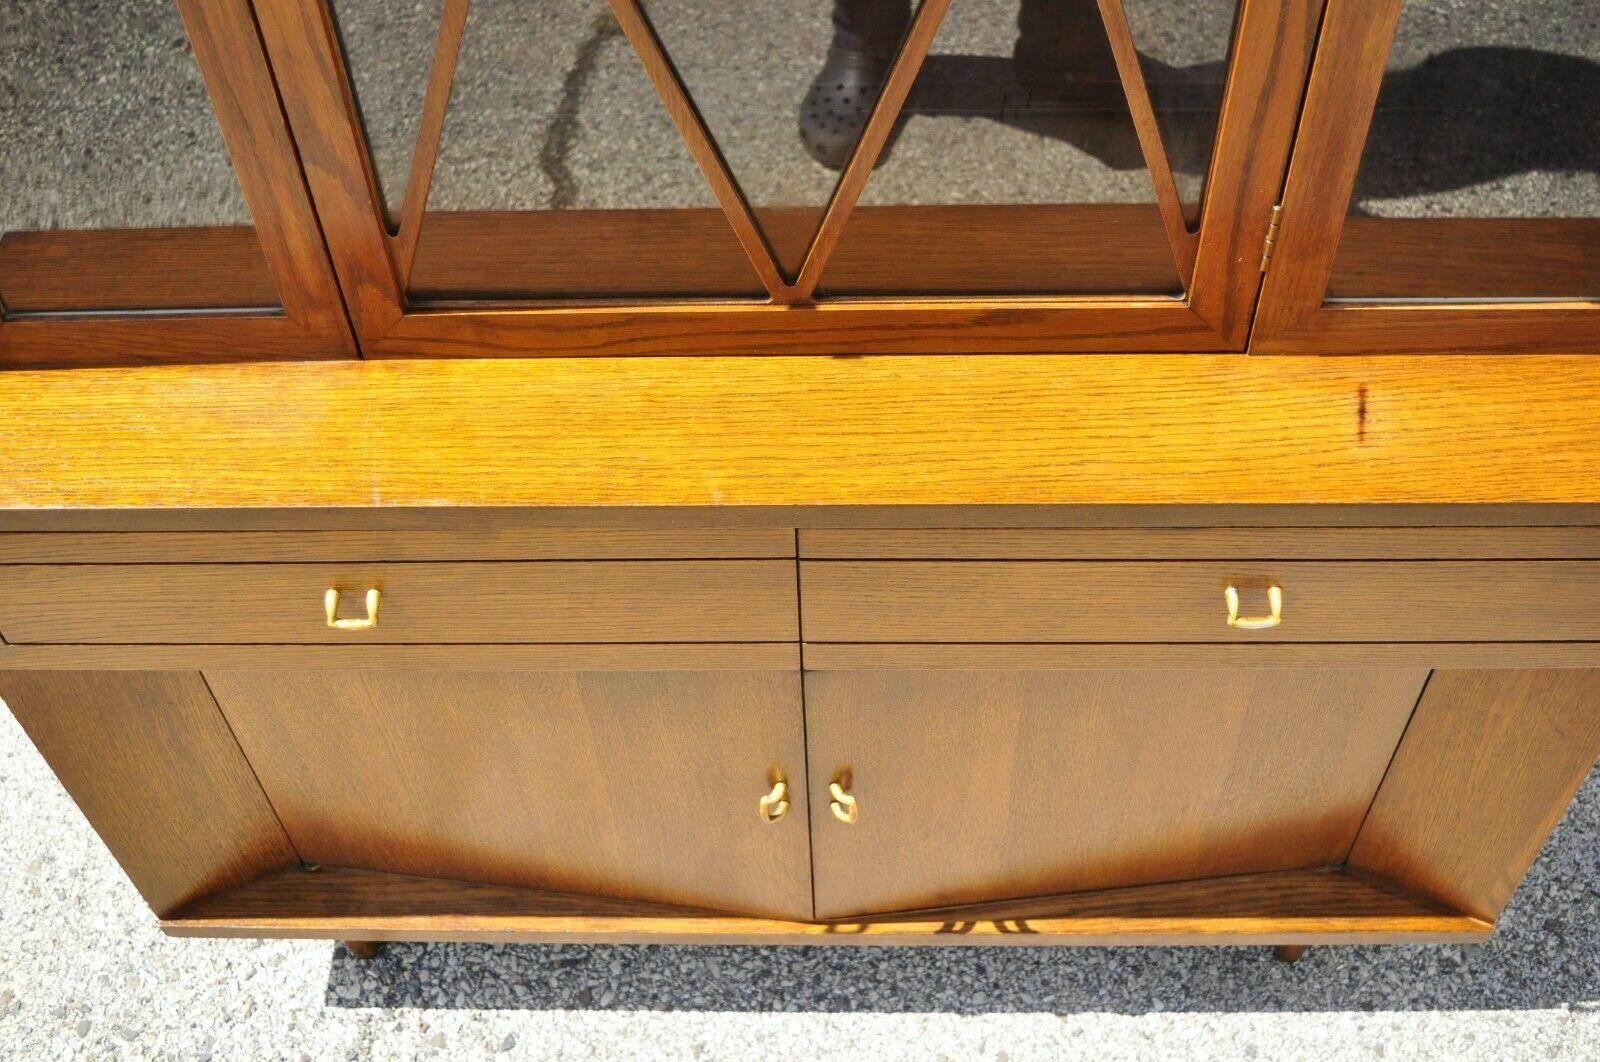 20th Century Raymond Loewy Mengel Mid-Century Modern Sculpted Oak China Cabinet For Sale